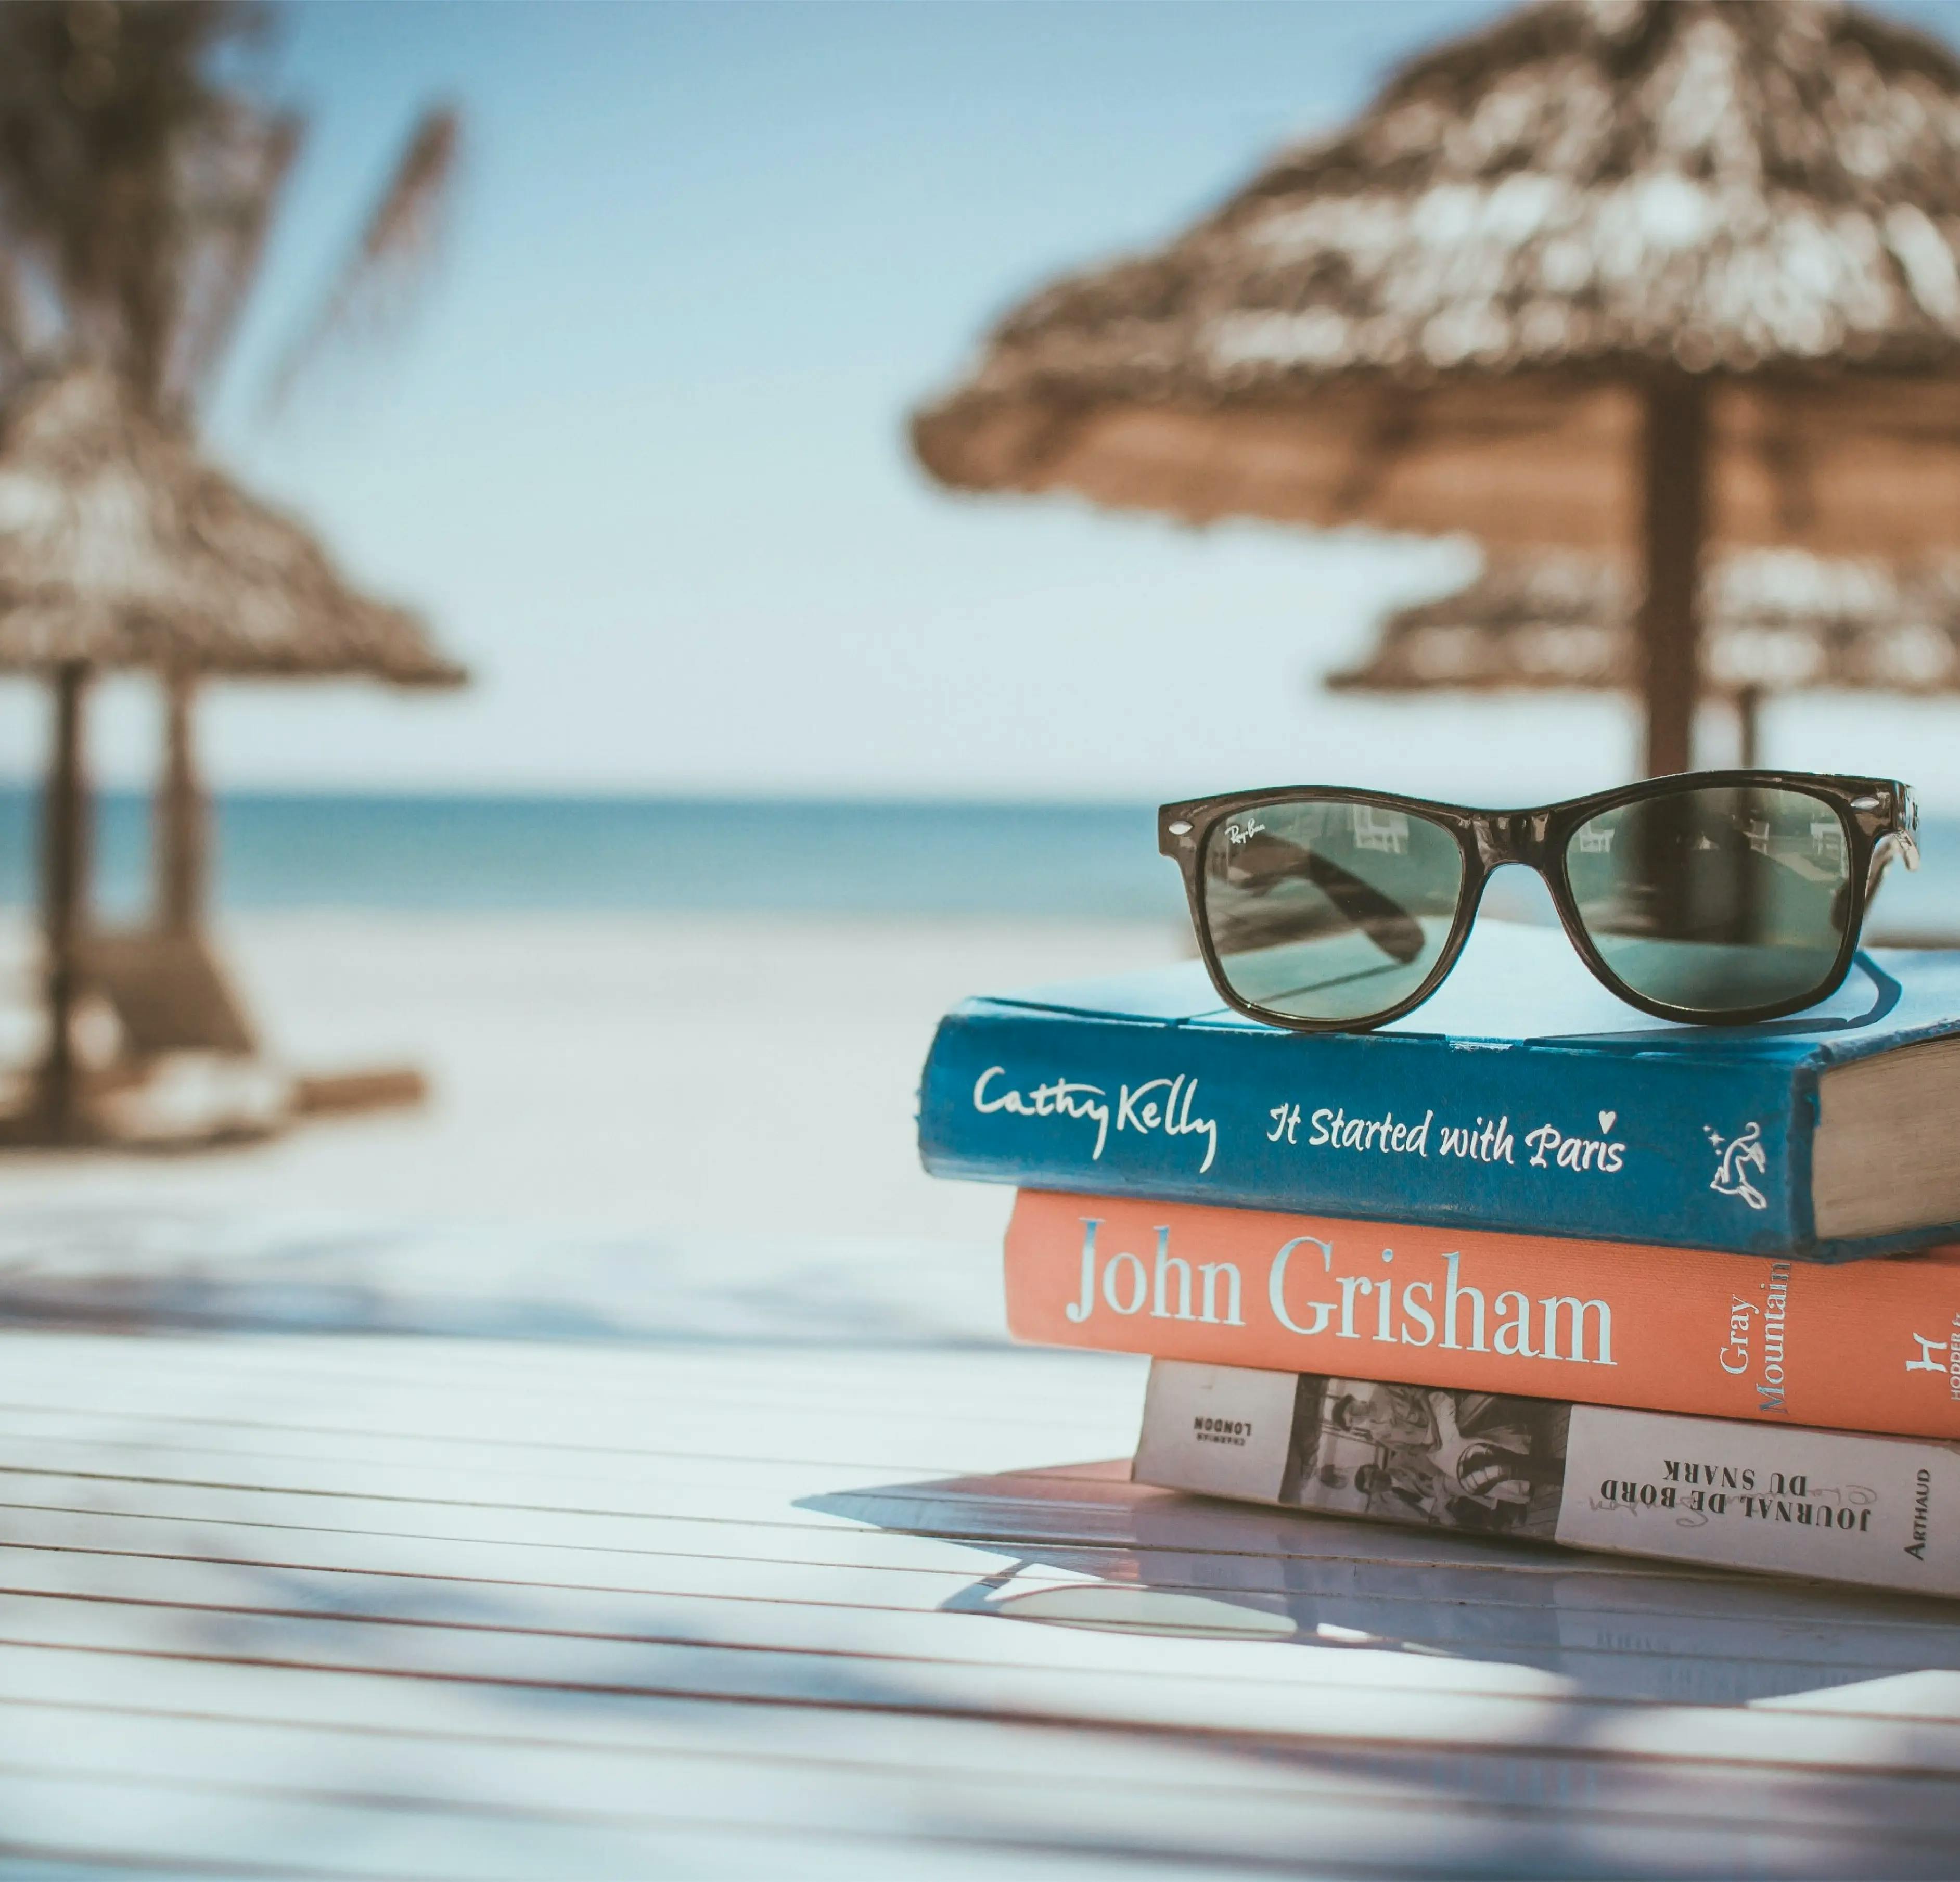 Blurred beach background with thatched umbrellas for shade. In the foreground, two books with sunglasses placed on top, in focus.